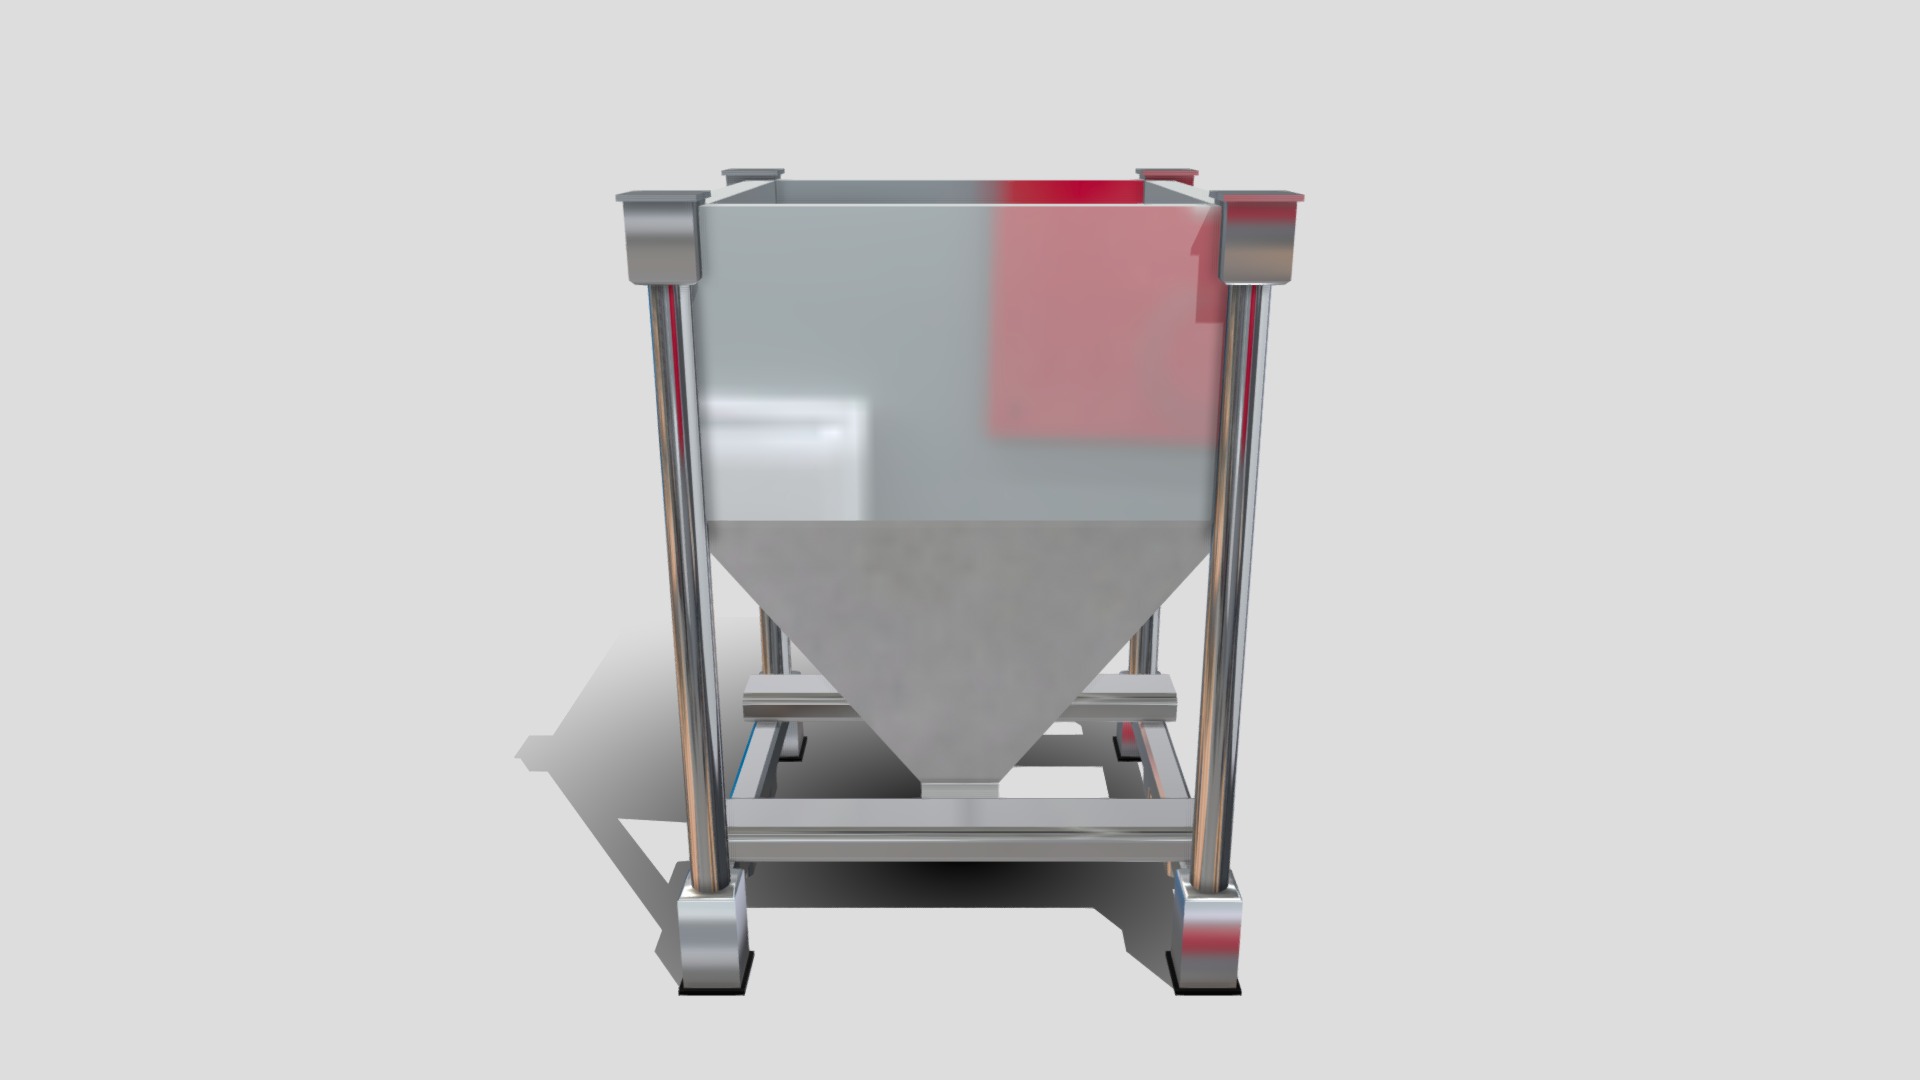 3D model Machinery – Stainless Steel Hopper - This is a 3D model of the Machinery - Stainless Steel Hopper. The 3D model is about a silver and red shopping cart.